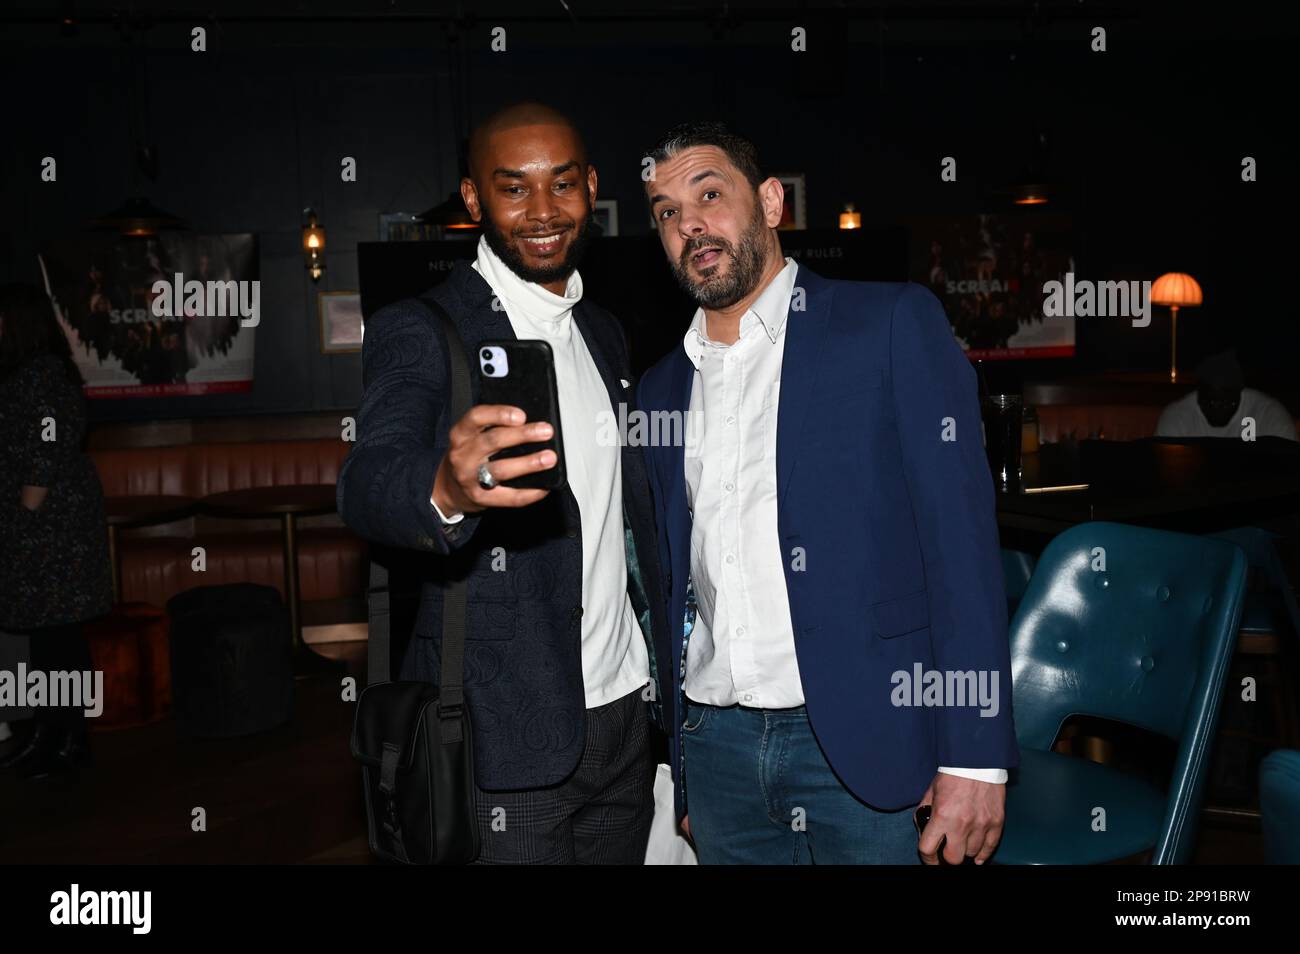 London, UK. 9th March 2023. Chef Andre and International Imad attends The reality Lifestyle, Influencer comes together at the All Star Lanes - White City bowling, drinks & canapes for Paramount Pictures brings the screening of Scream VILi/Picture Capital/Alamy Live NewsCredit:See Li/Picture Capital/Alamy Live NewsCredit:See Li/Picture Capital/Alamy Live News Stock Photo